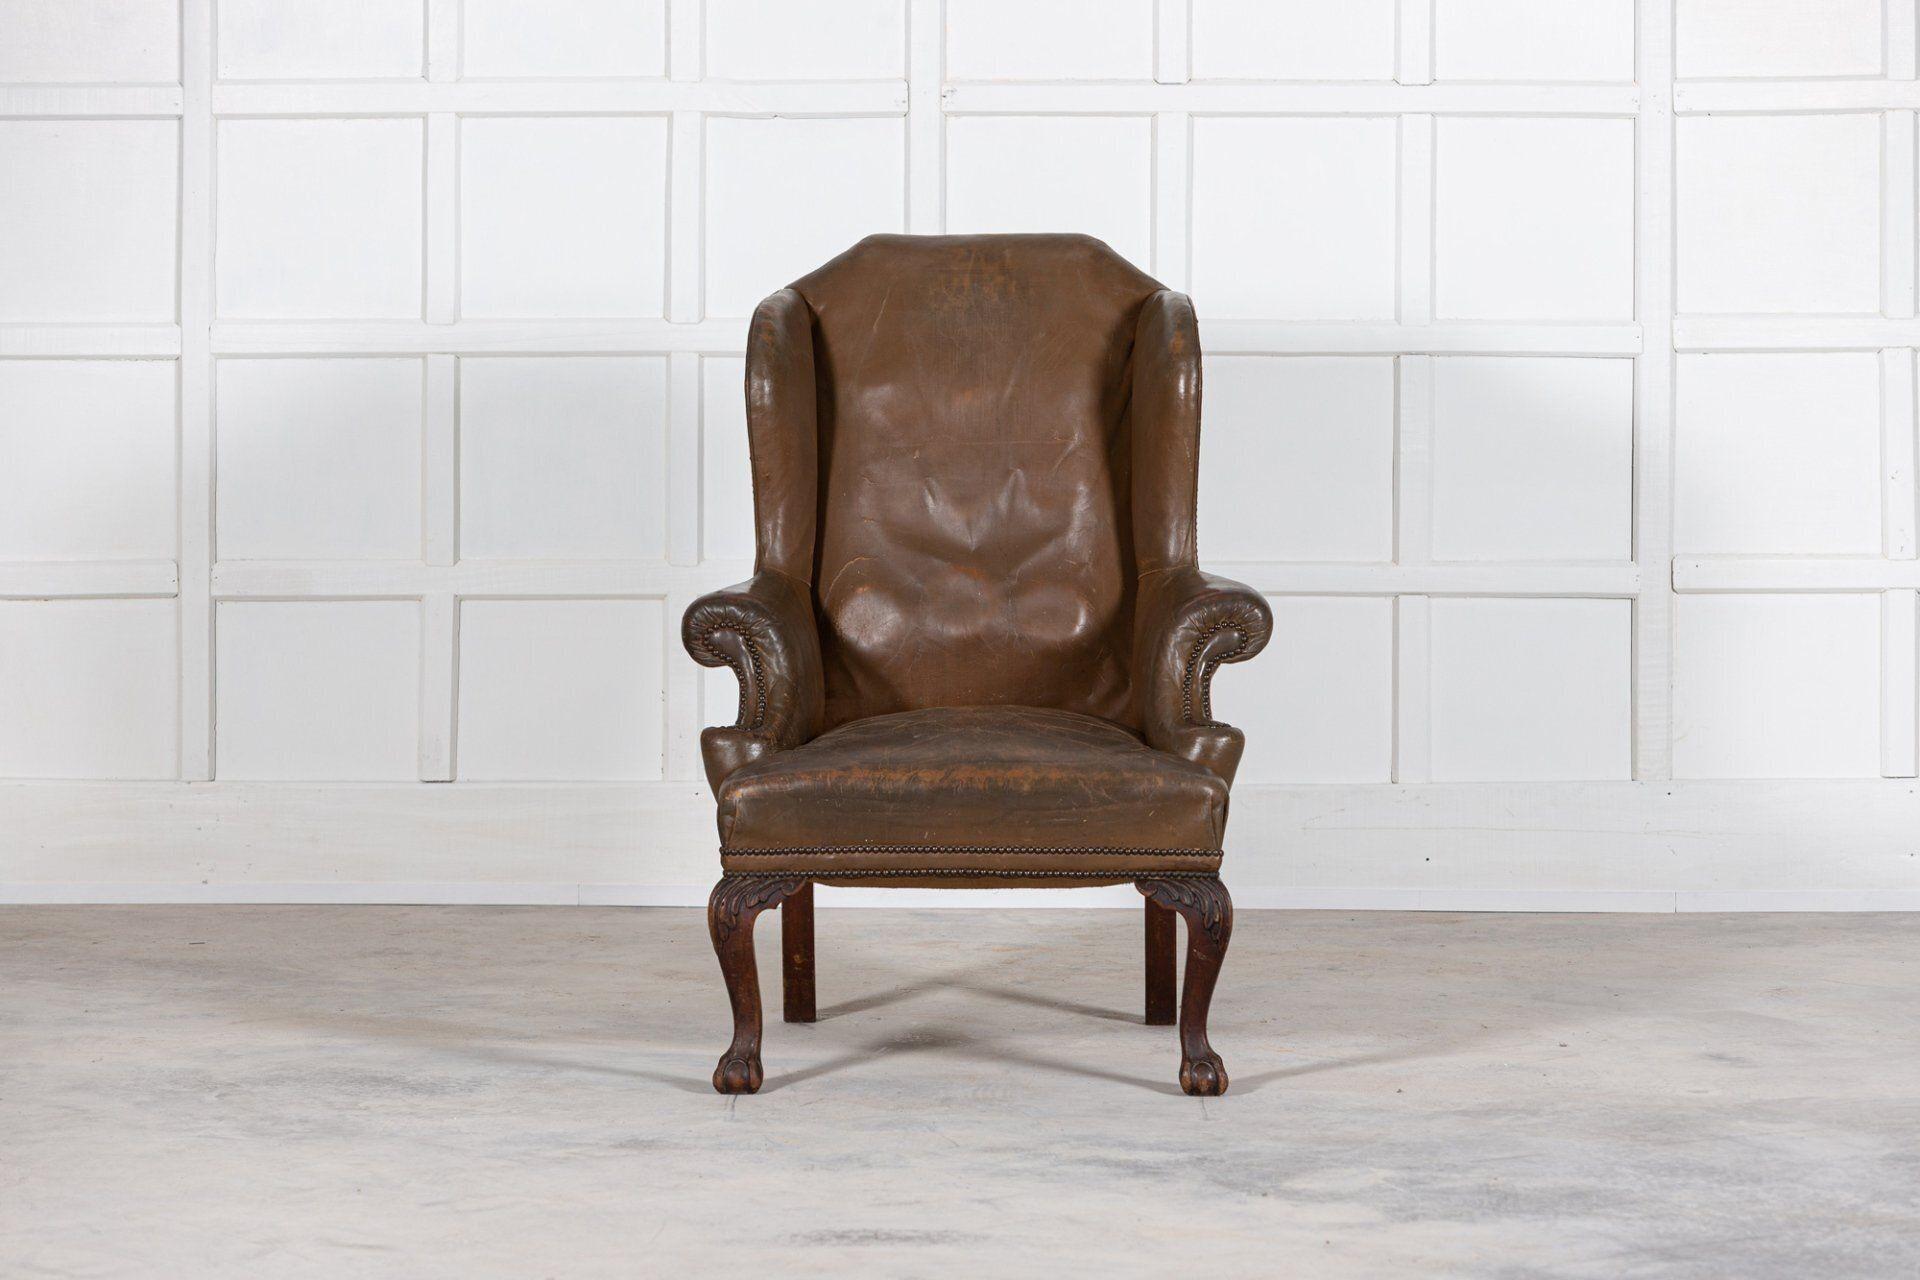 Circa 1880
Large 19thC English olive leather & mahogany wingback armchair
Measures: W 83 x D 96 x H 118cm
Seat height 49 cm.
  